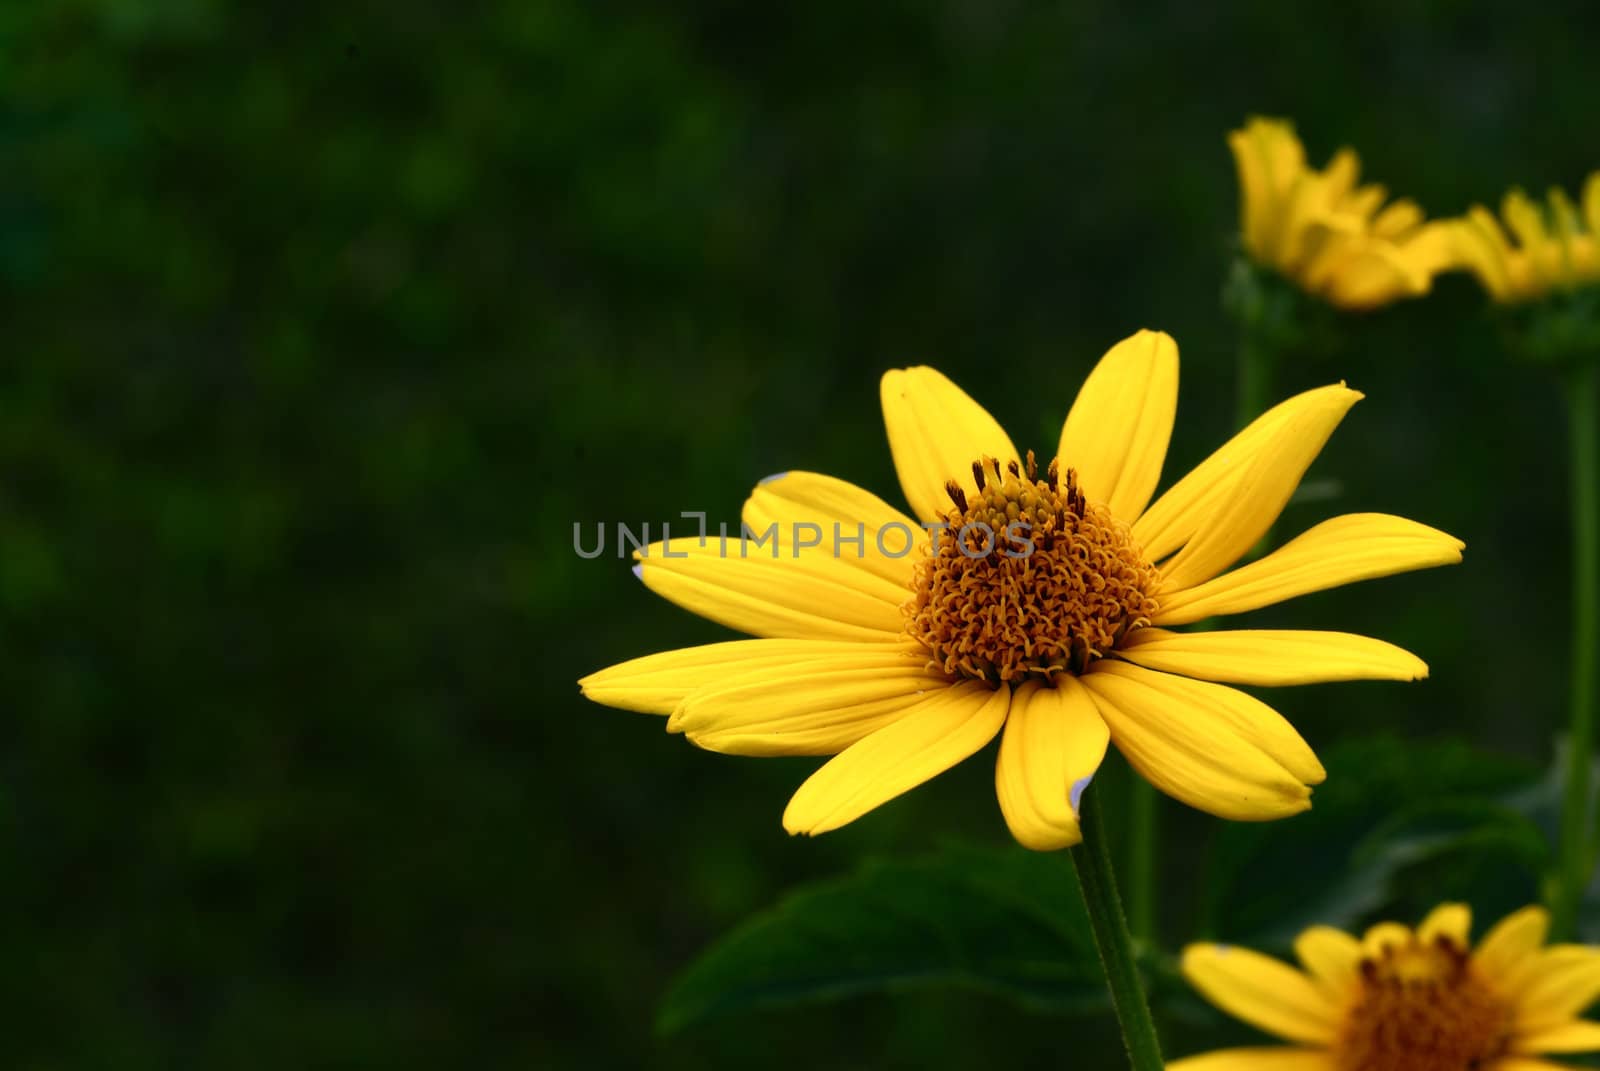 pretty sunflower isolated against a green natural back ground with copyspace